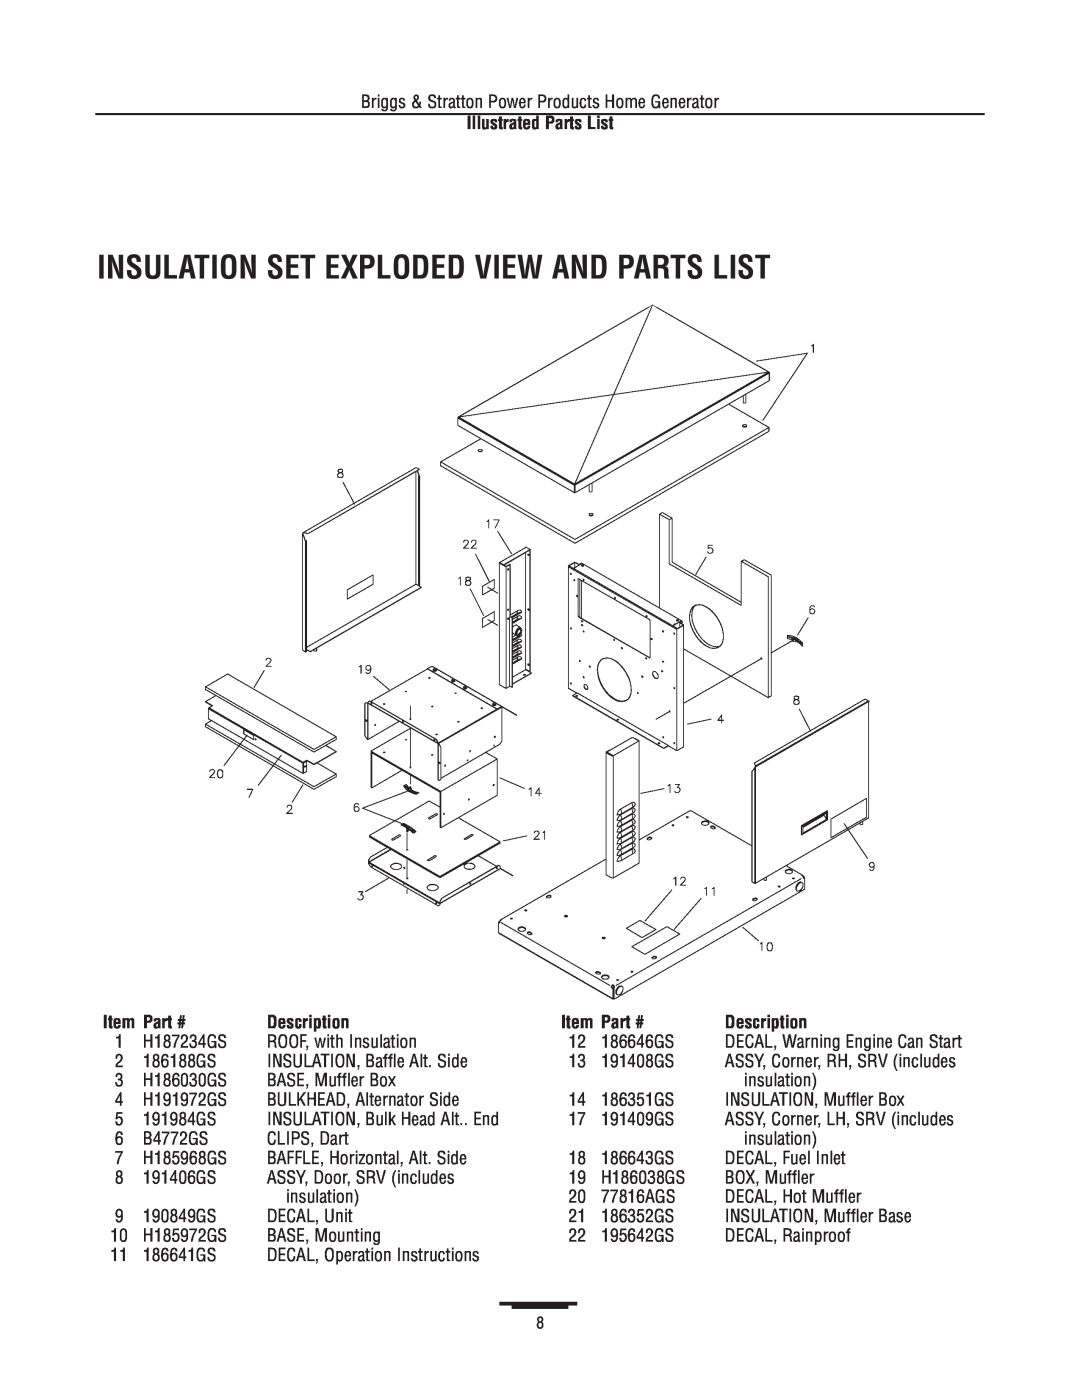 Briggs & Stratton 1815 Insulation Set Exploded View And Parts List, Illustrated Parts List, Item, Part #, Description 